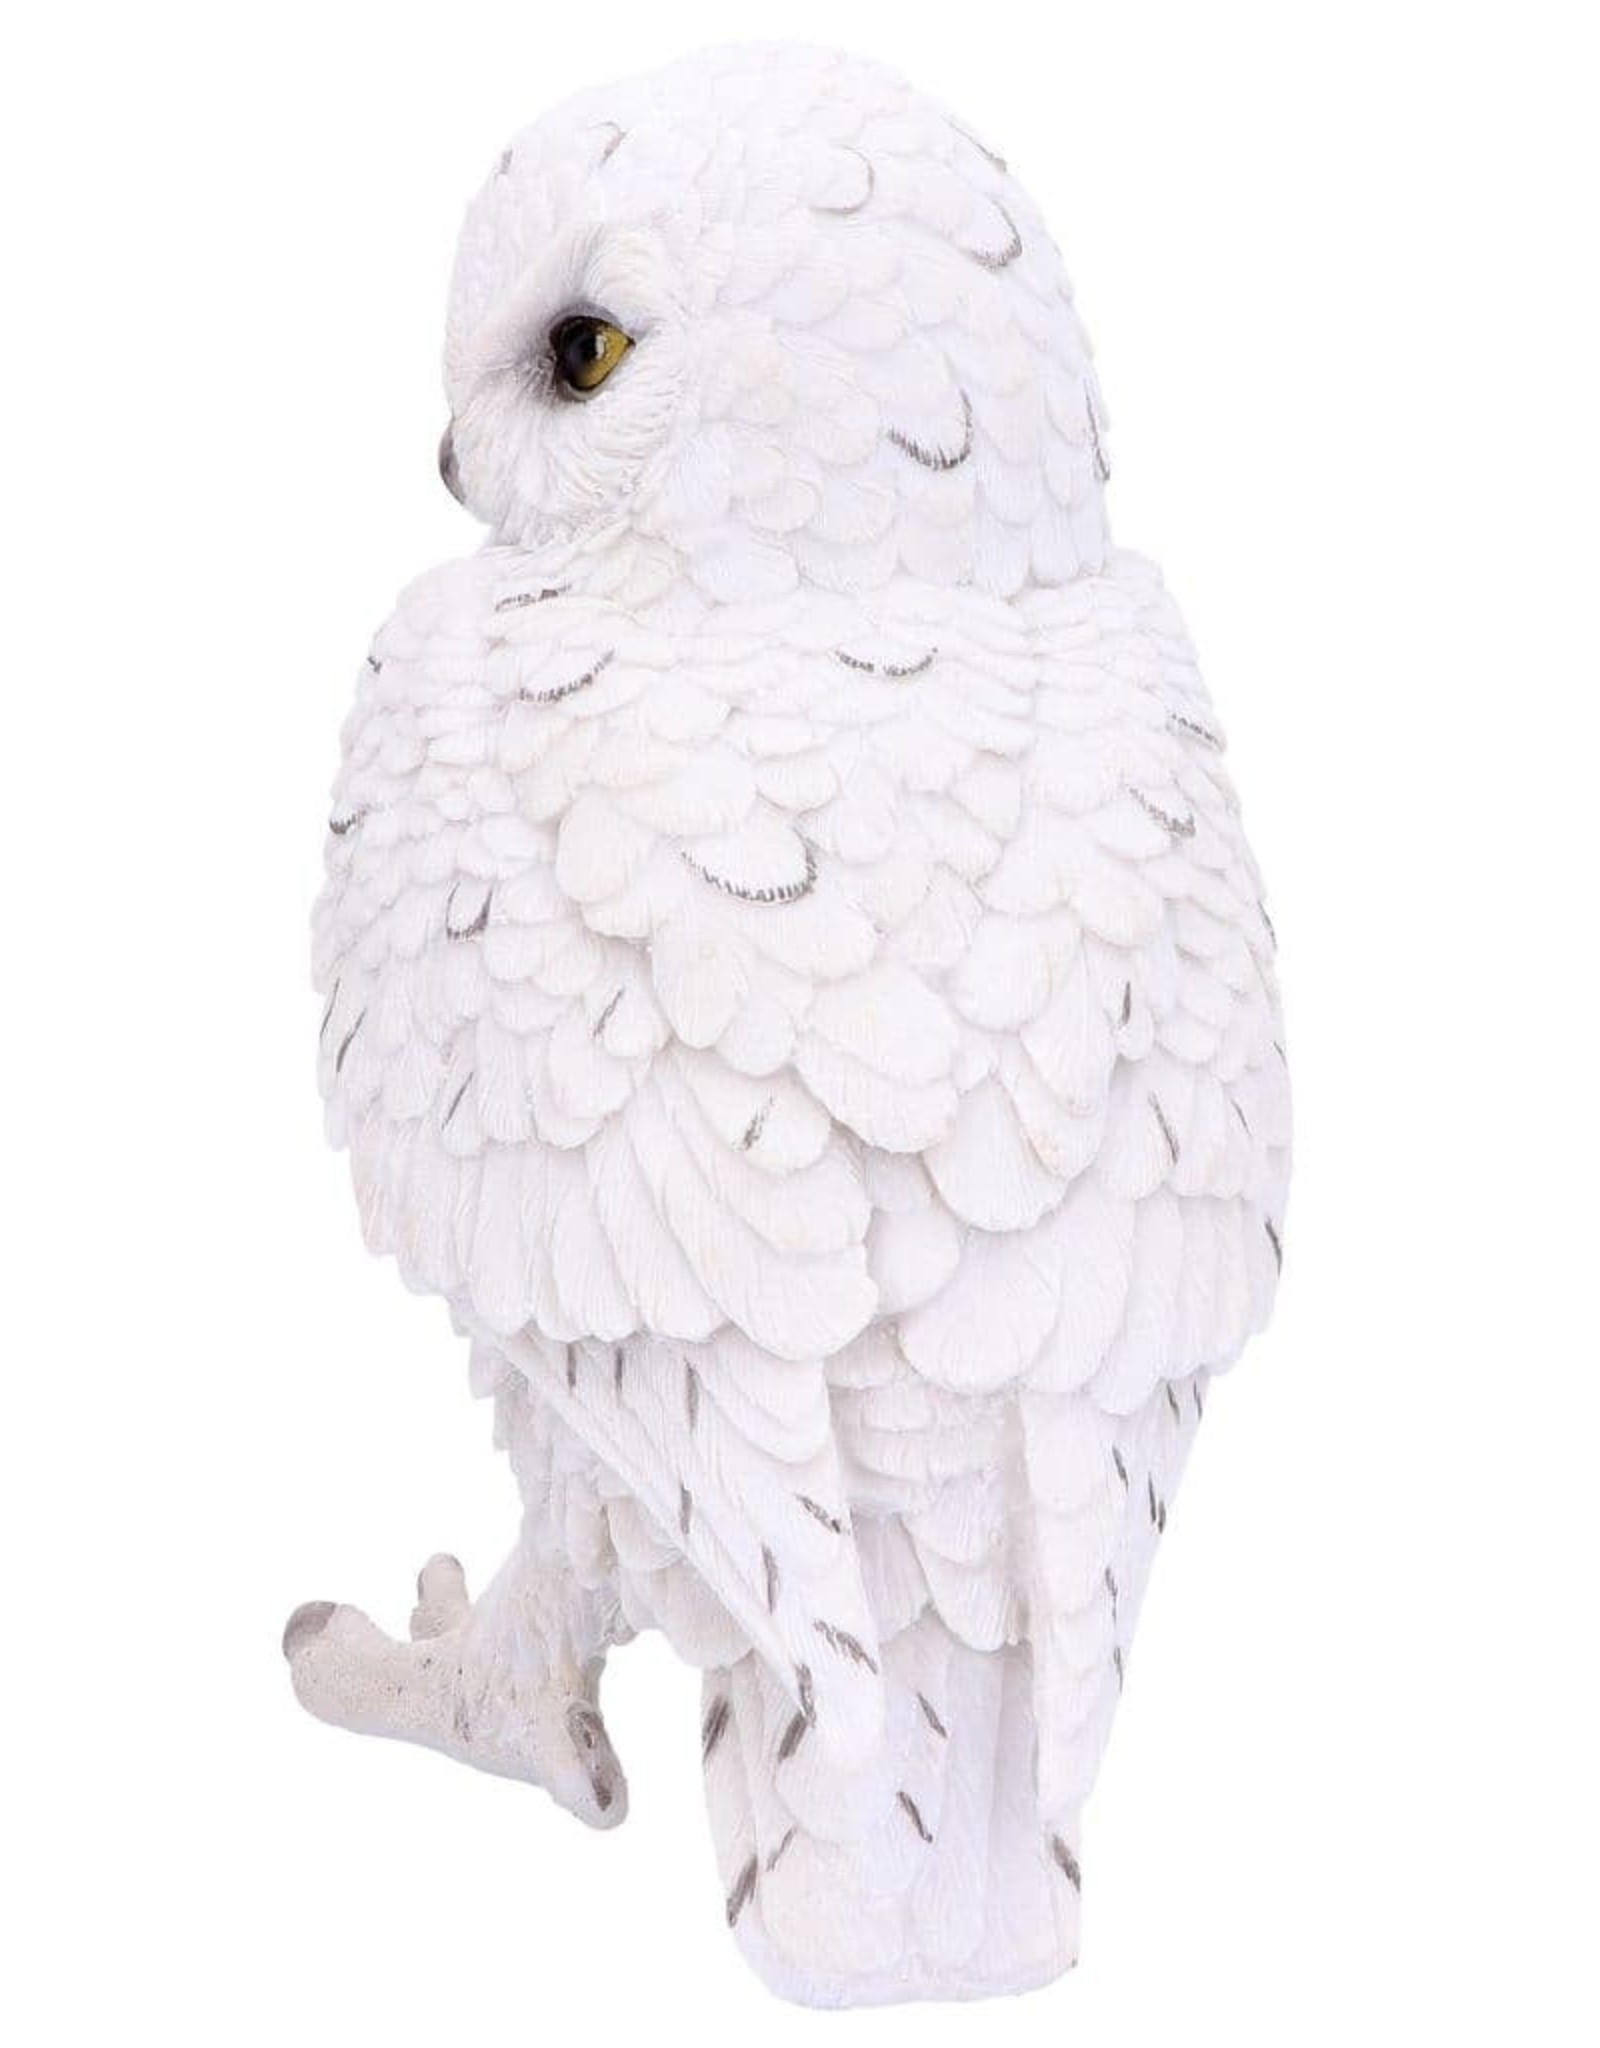 Alator Collectables - Snowy Watch Witte Uil beeld Large (20cm ) - Nemesis Now